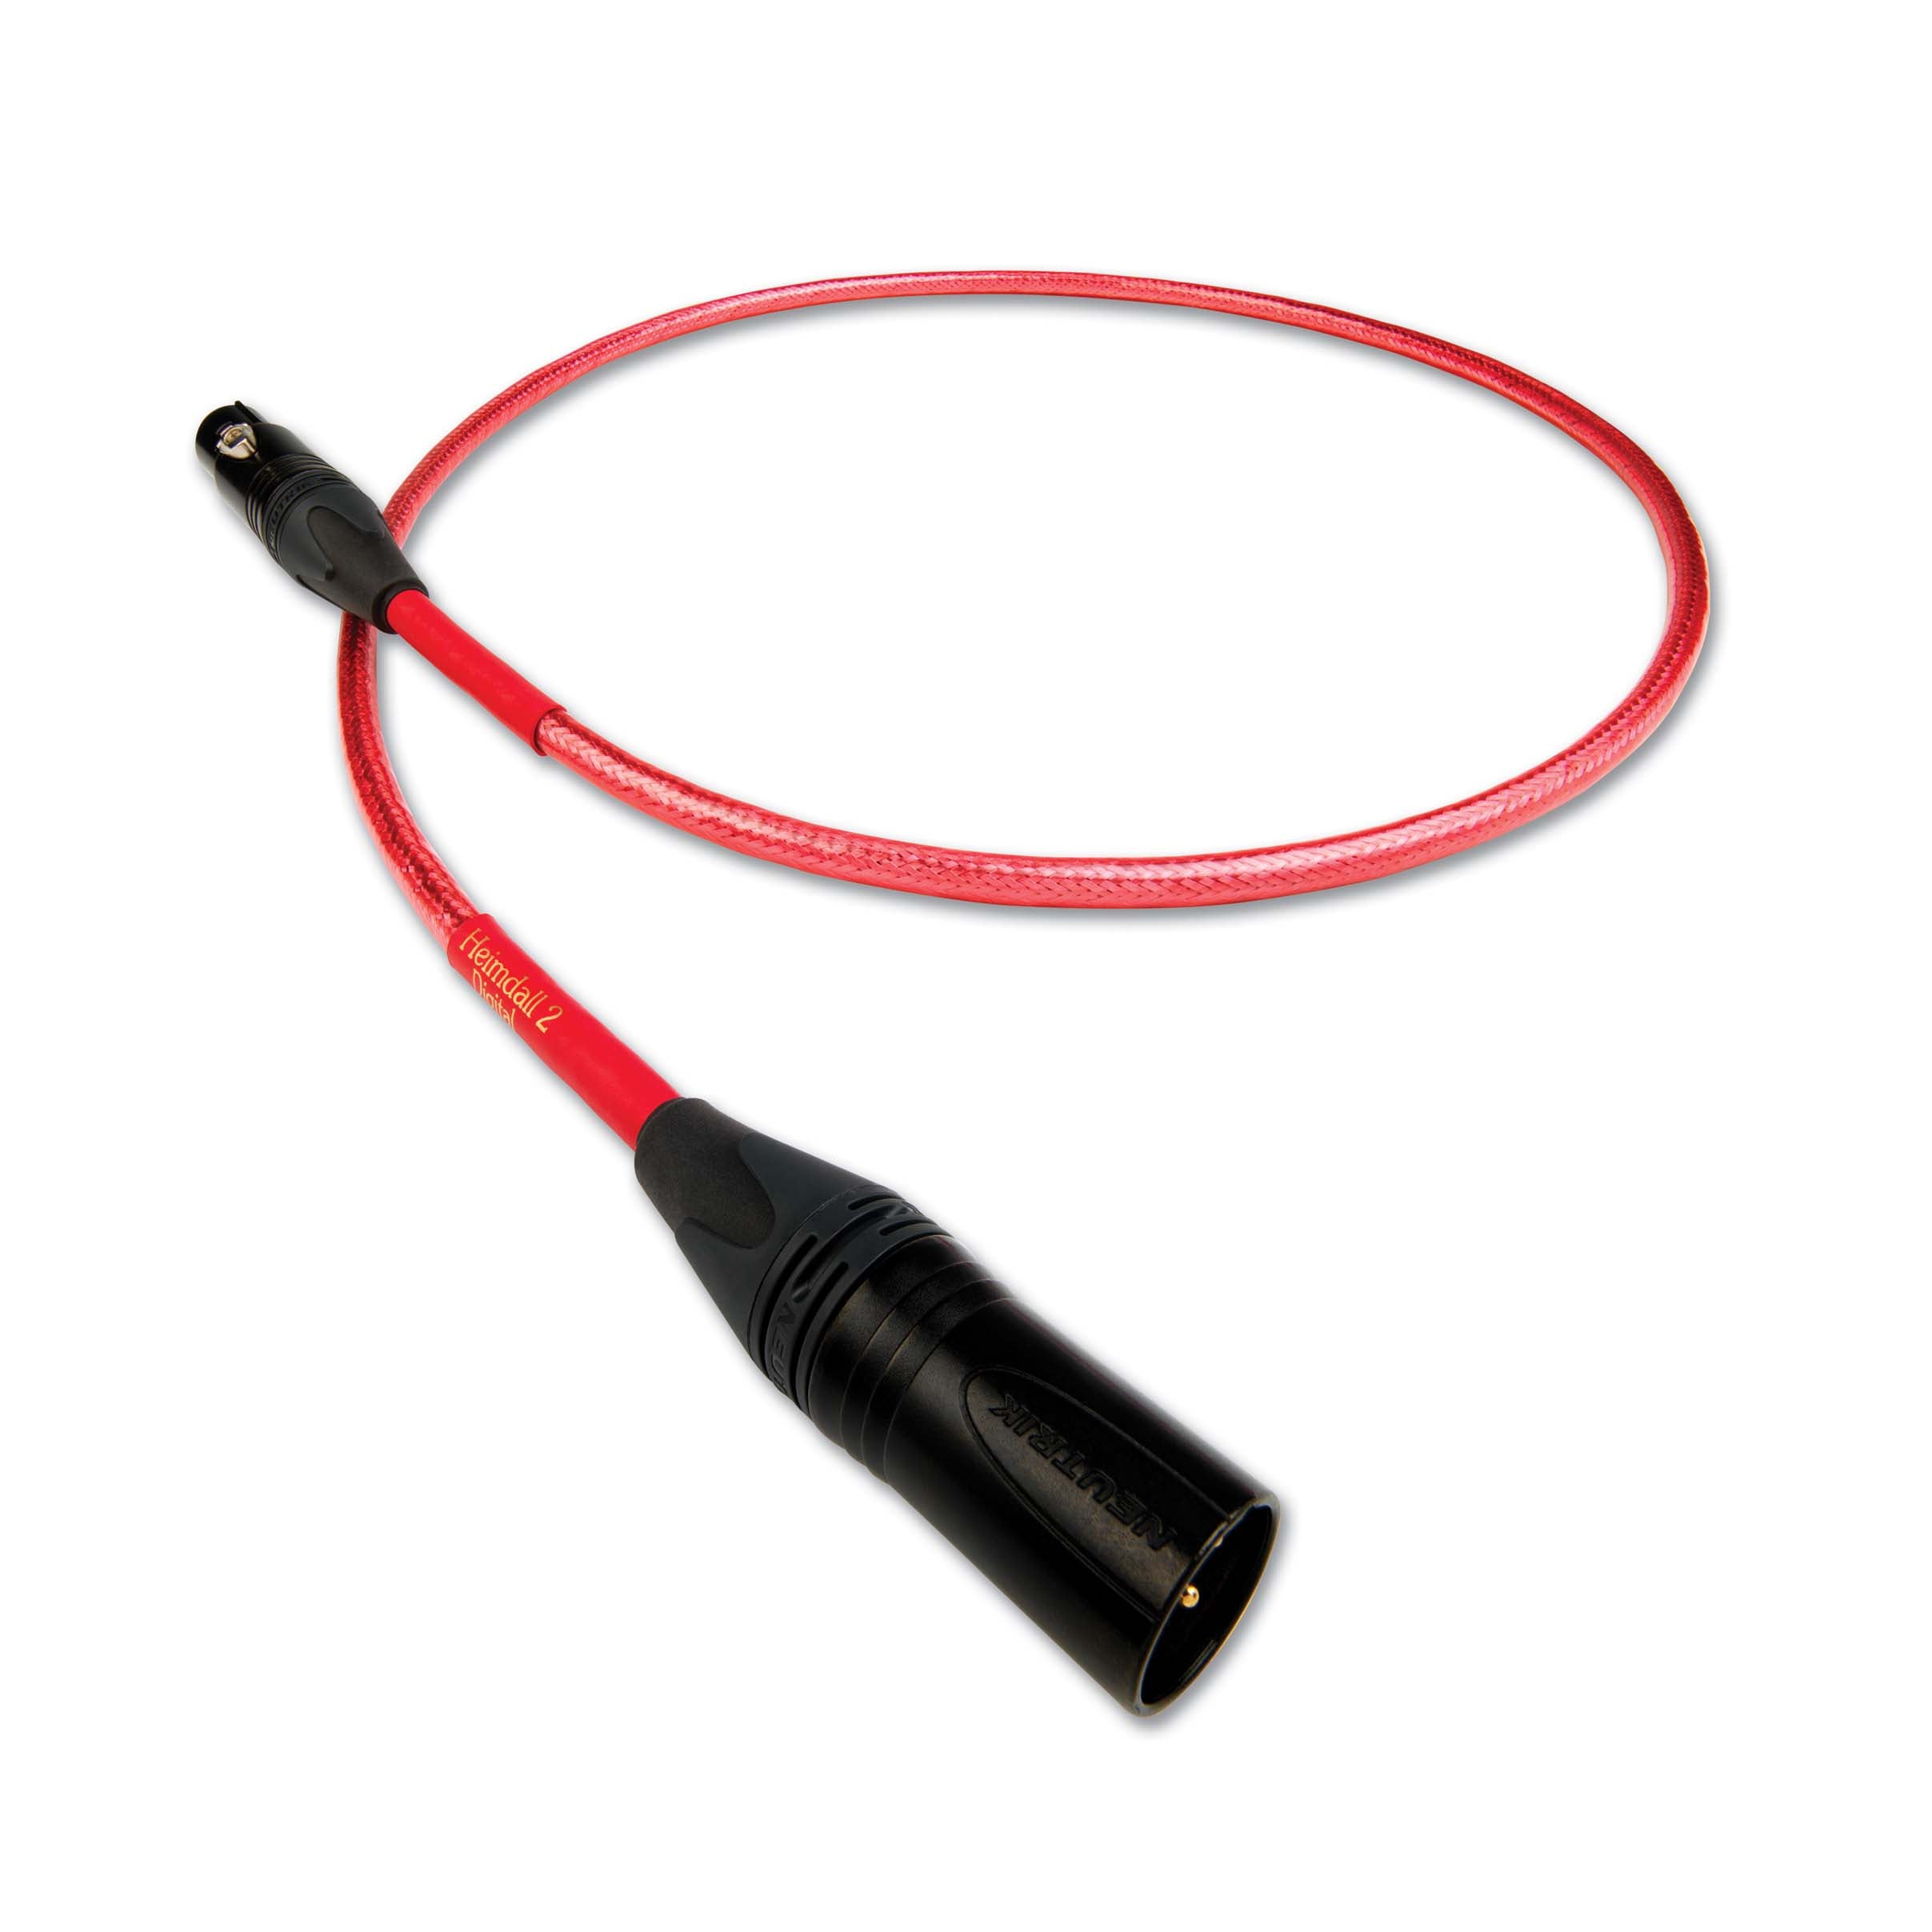 Nordost Heimdall 2 Digital - 110 OHM Cable